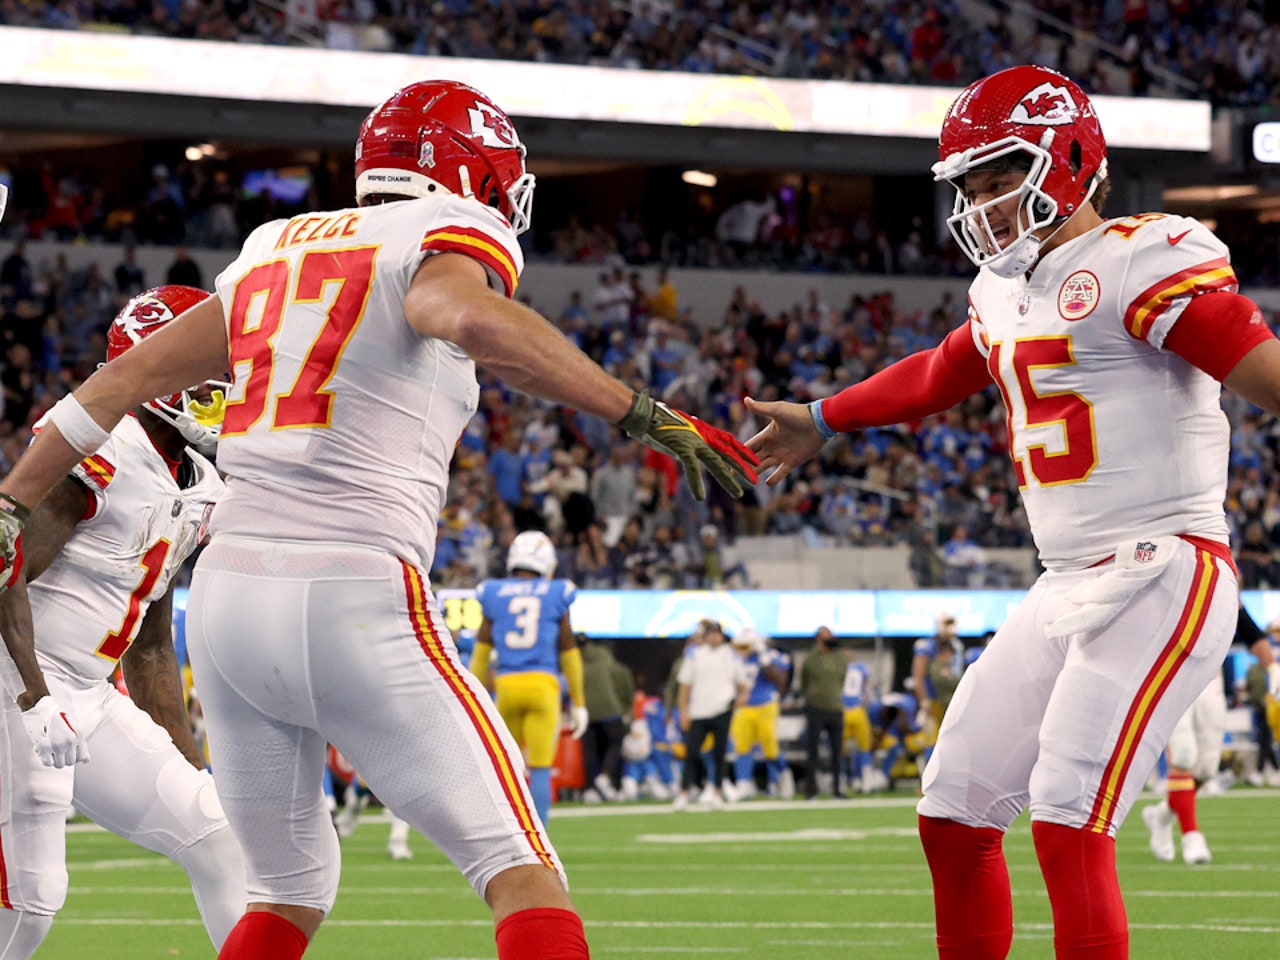 Los Angeles Rams vs. Kansas City Chiefs betting odds for NFL Week 12